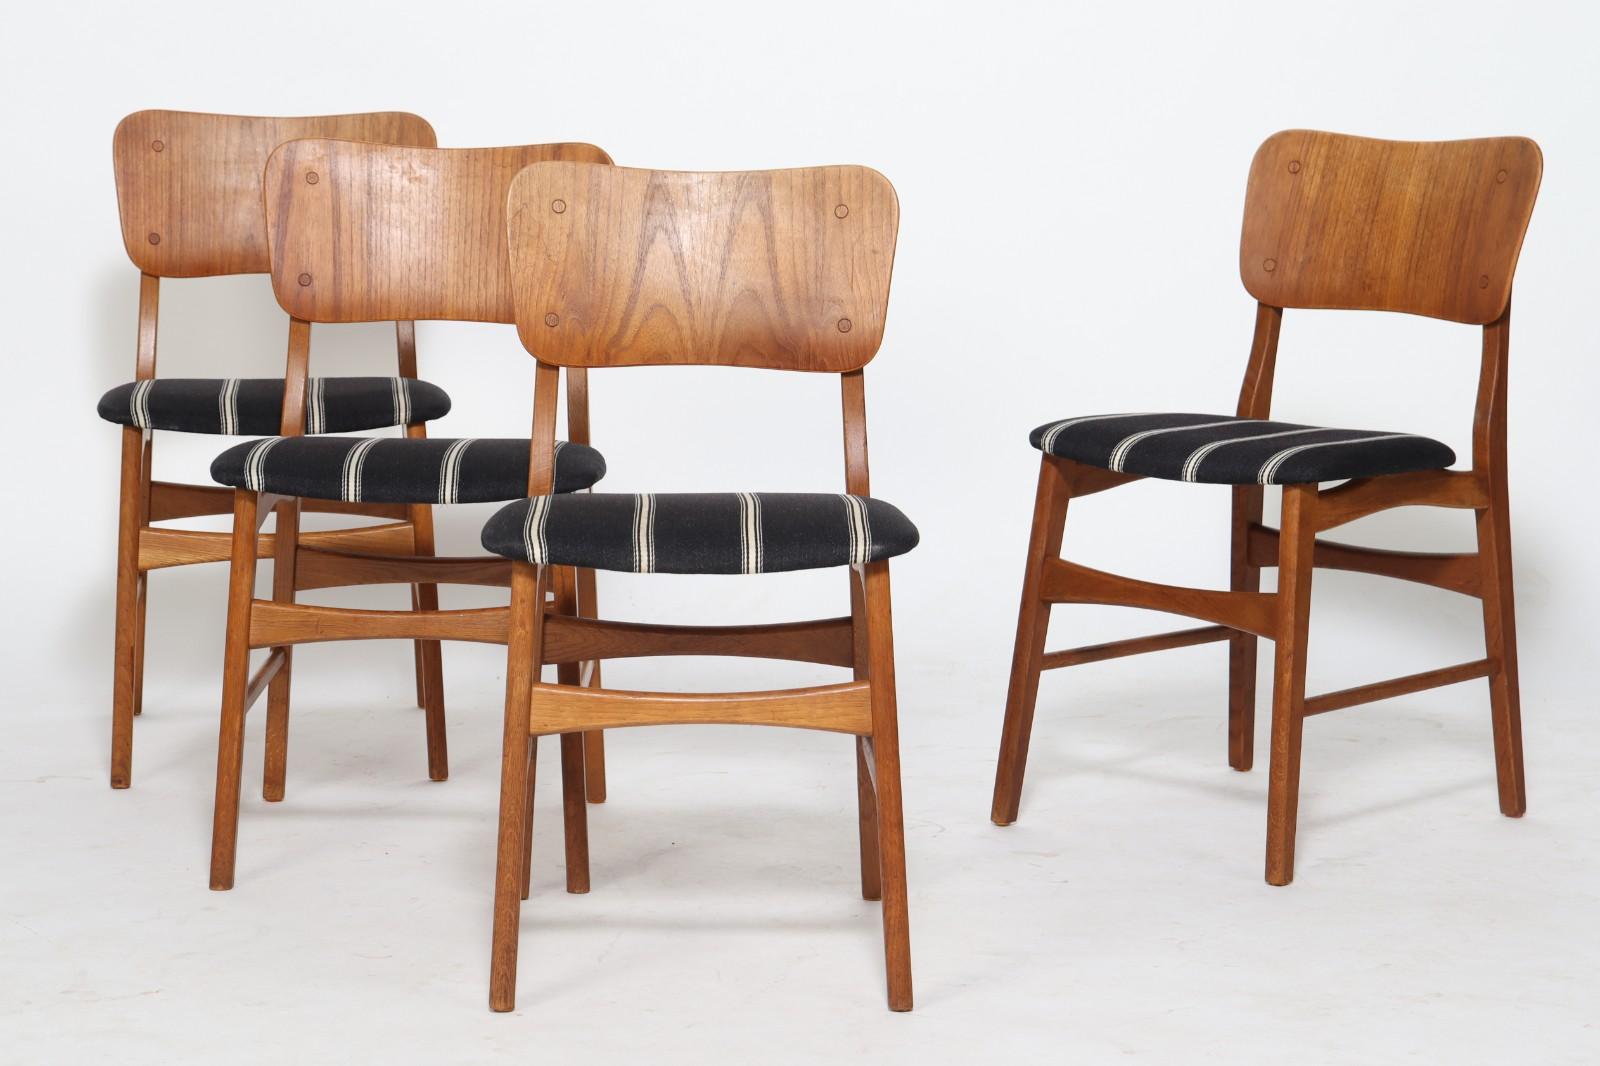 Ib Kofod Larsen. Four chairs with teak backrest, oak frame, seats upholstered in wool. Traces of wear. H 80 cm, SH 45 cm 